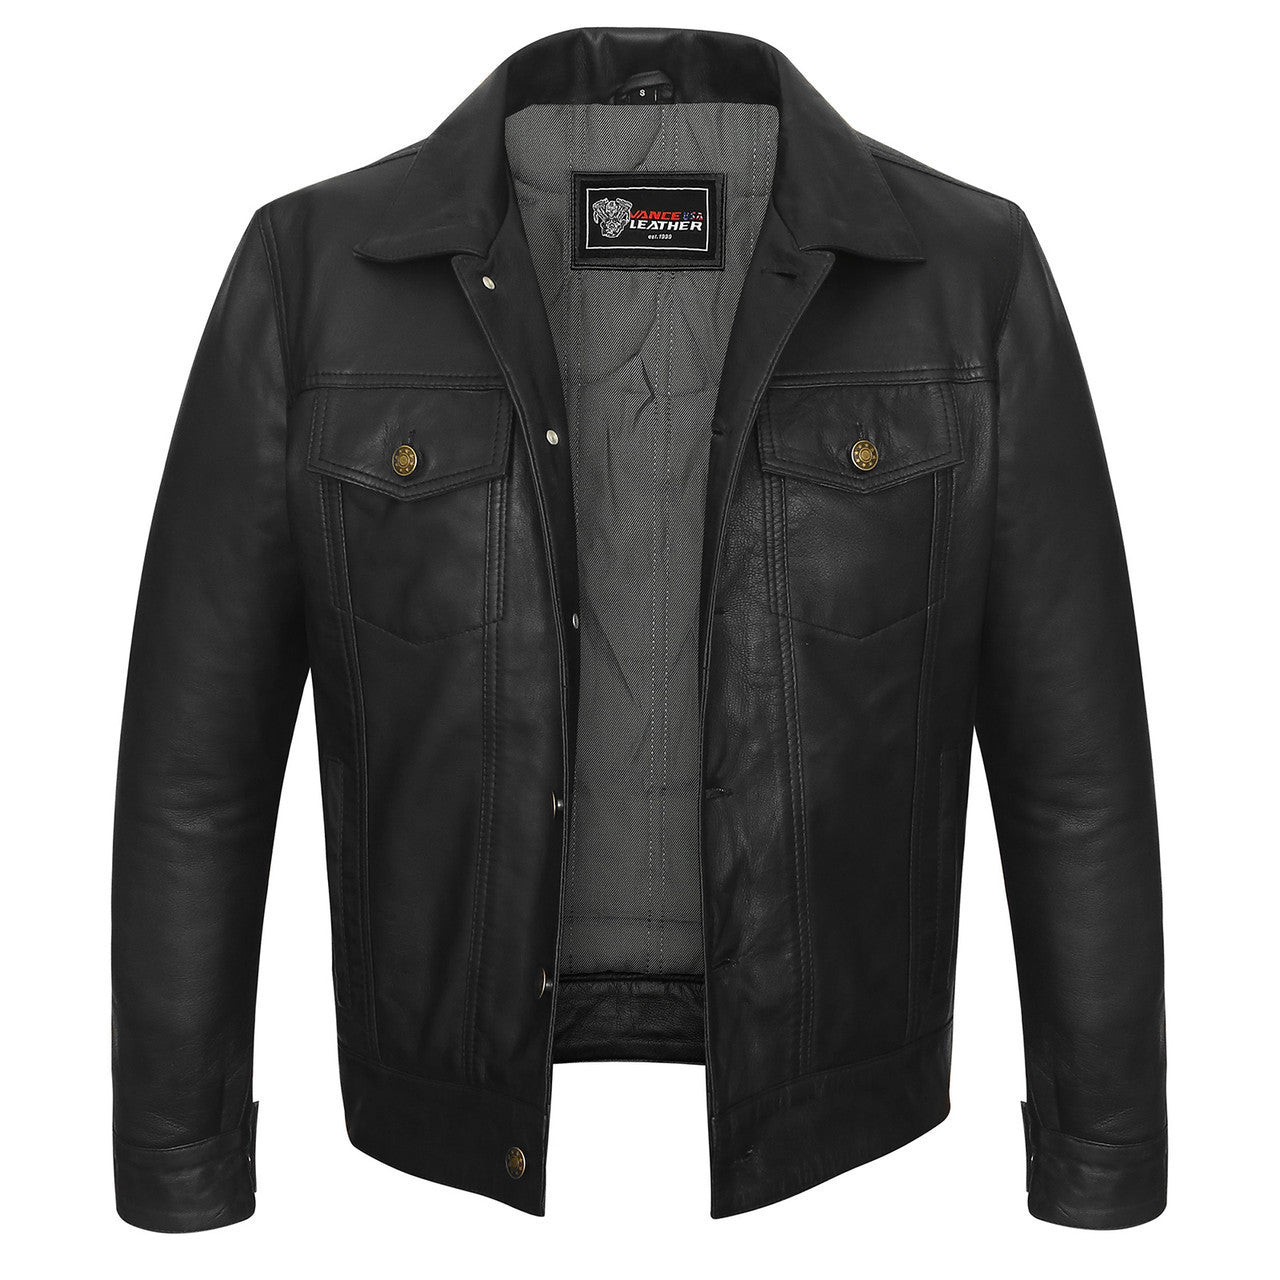 Vance-Leathers-VL555B-Mens-Black-Motorcycle-Trucker-Leather-Jacket-front-view